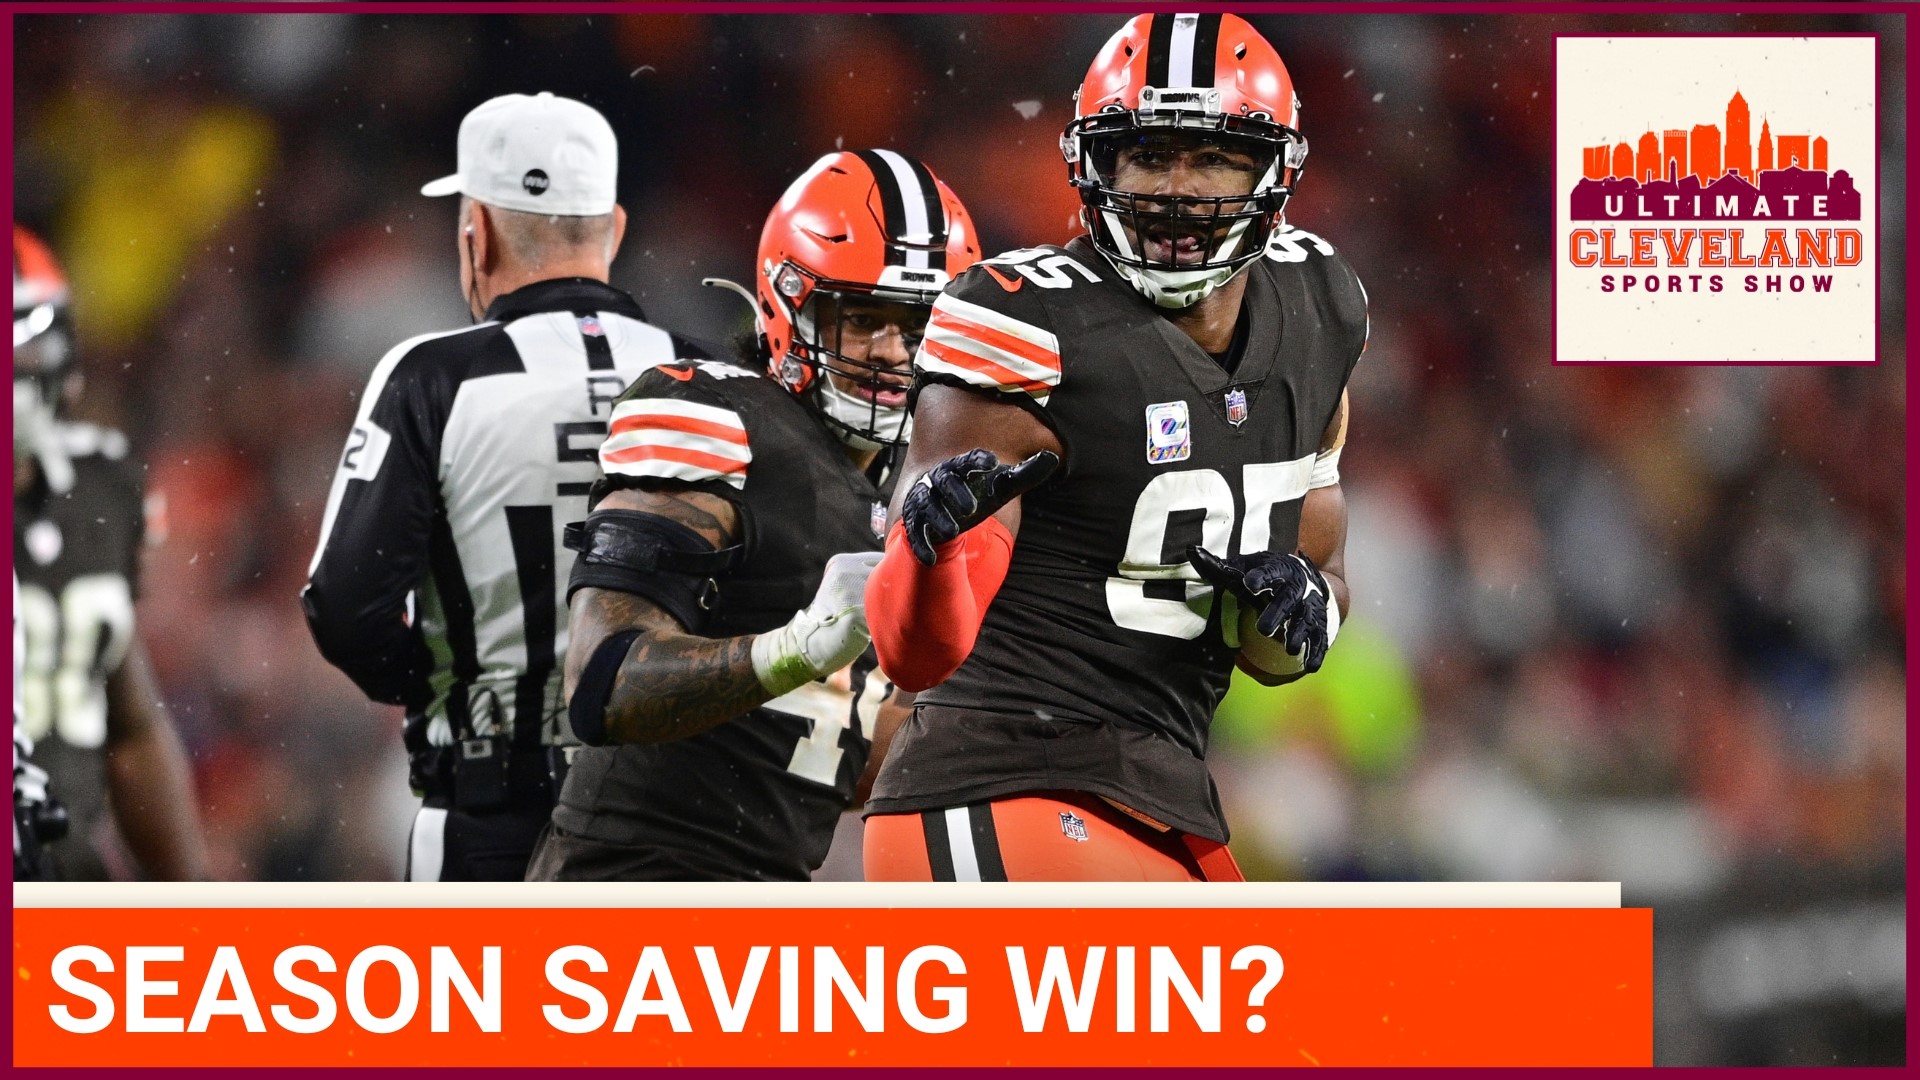 The Cleveland Browns are now 2-1 within the division. Are the Browns now very much alive to win the AFC North?